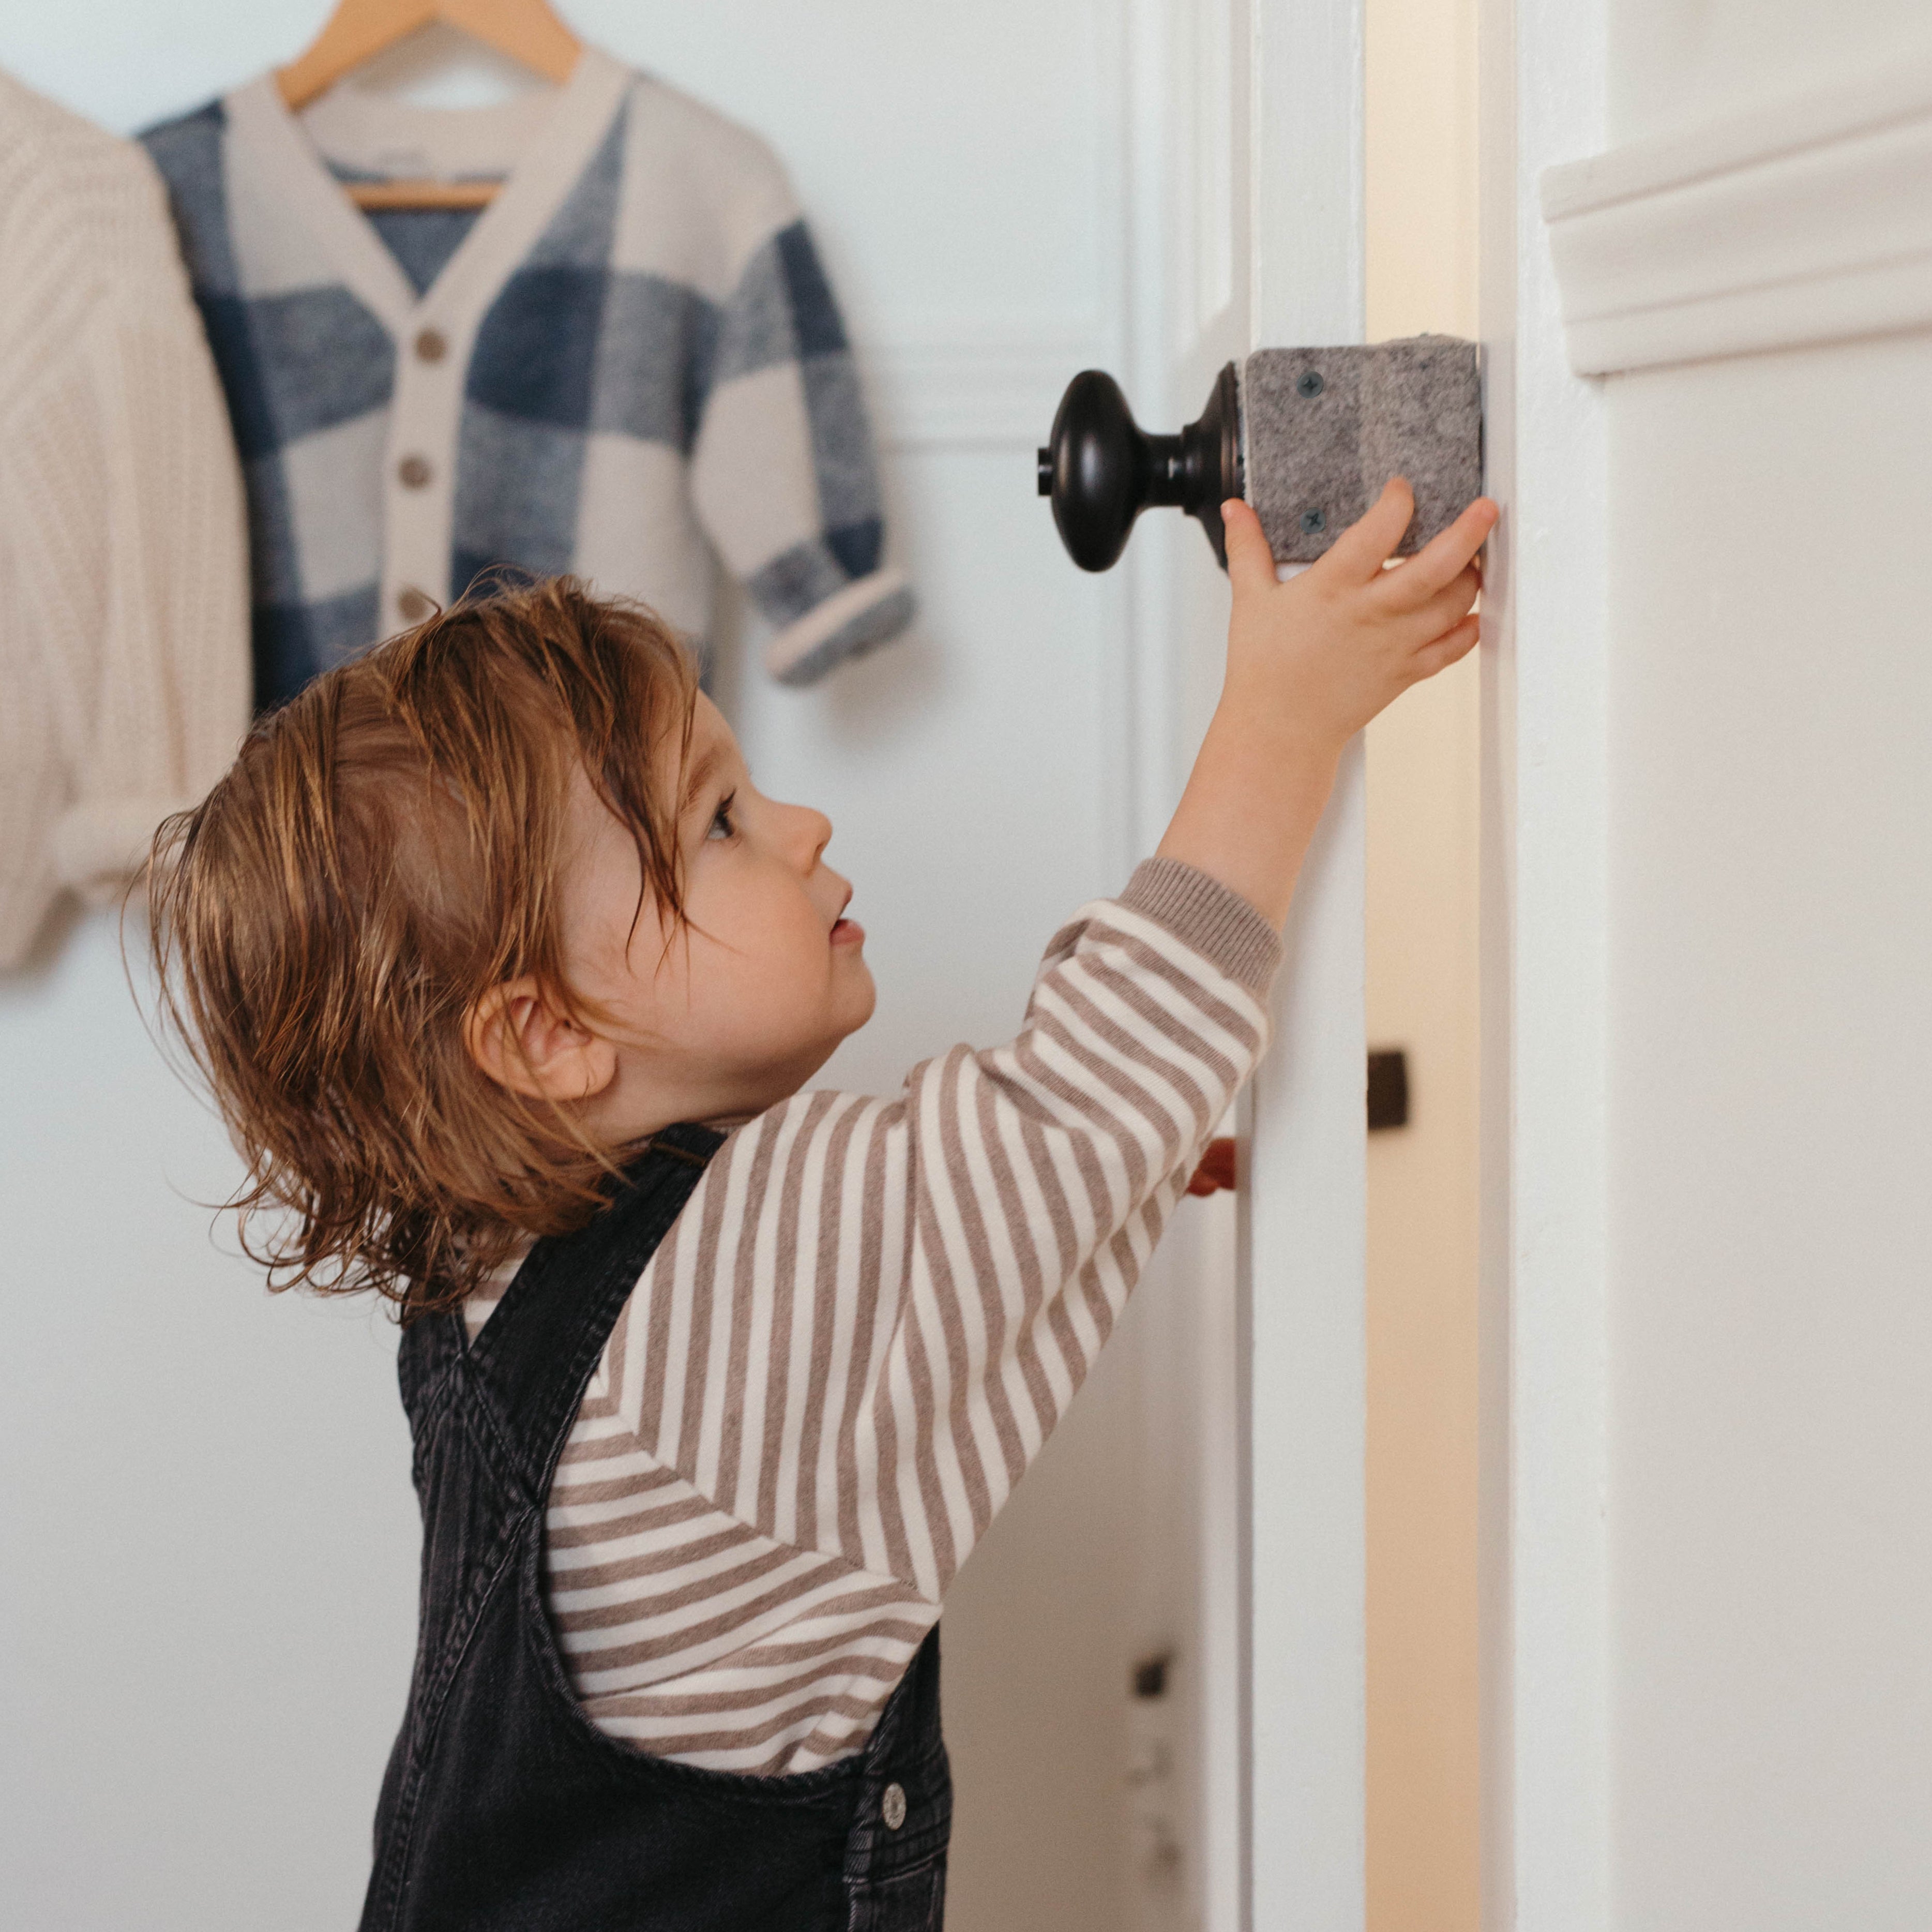 A toddler reaching up to grasp the Oolie Shoosh door silencer and safety bumper, shown installed in Bumper Mode, which prevents the door from closing fully, thereby protecting children&#39;s fingers from getting pinched in the door.